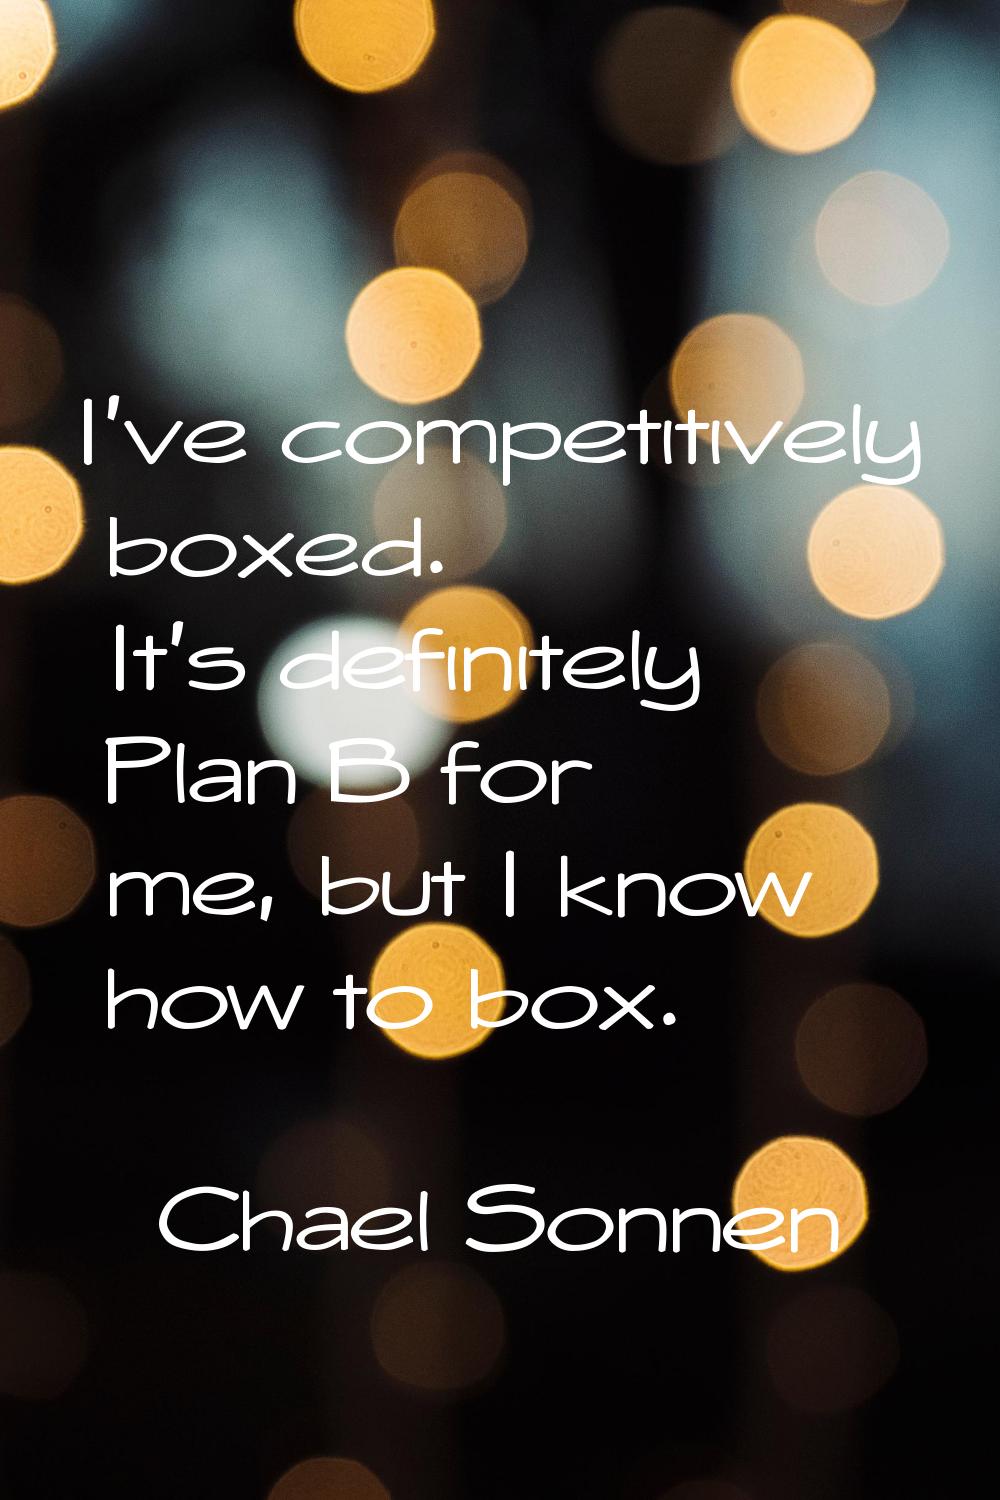 I've competitively boxed. It's definitely Plan B for me, but I know how to box.